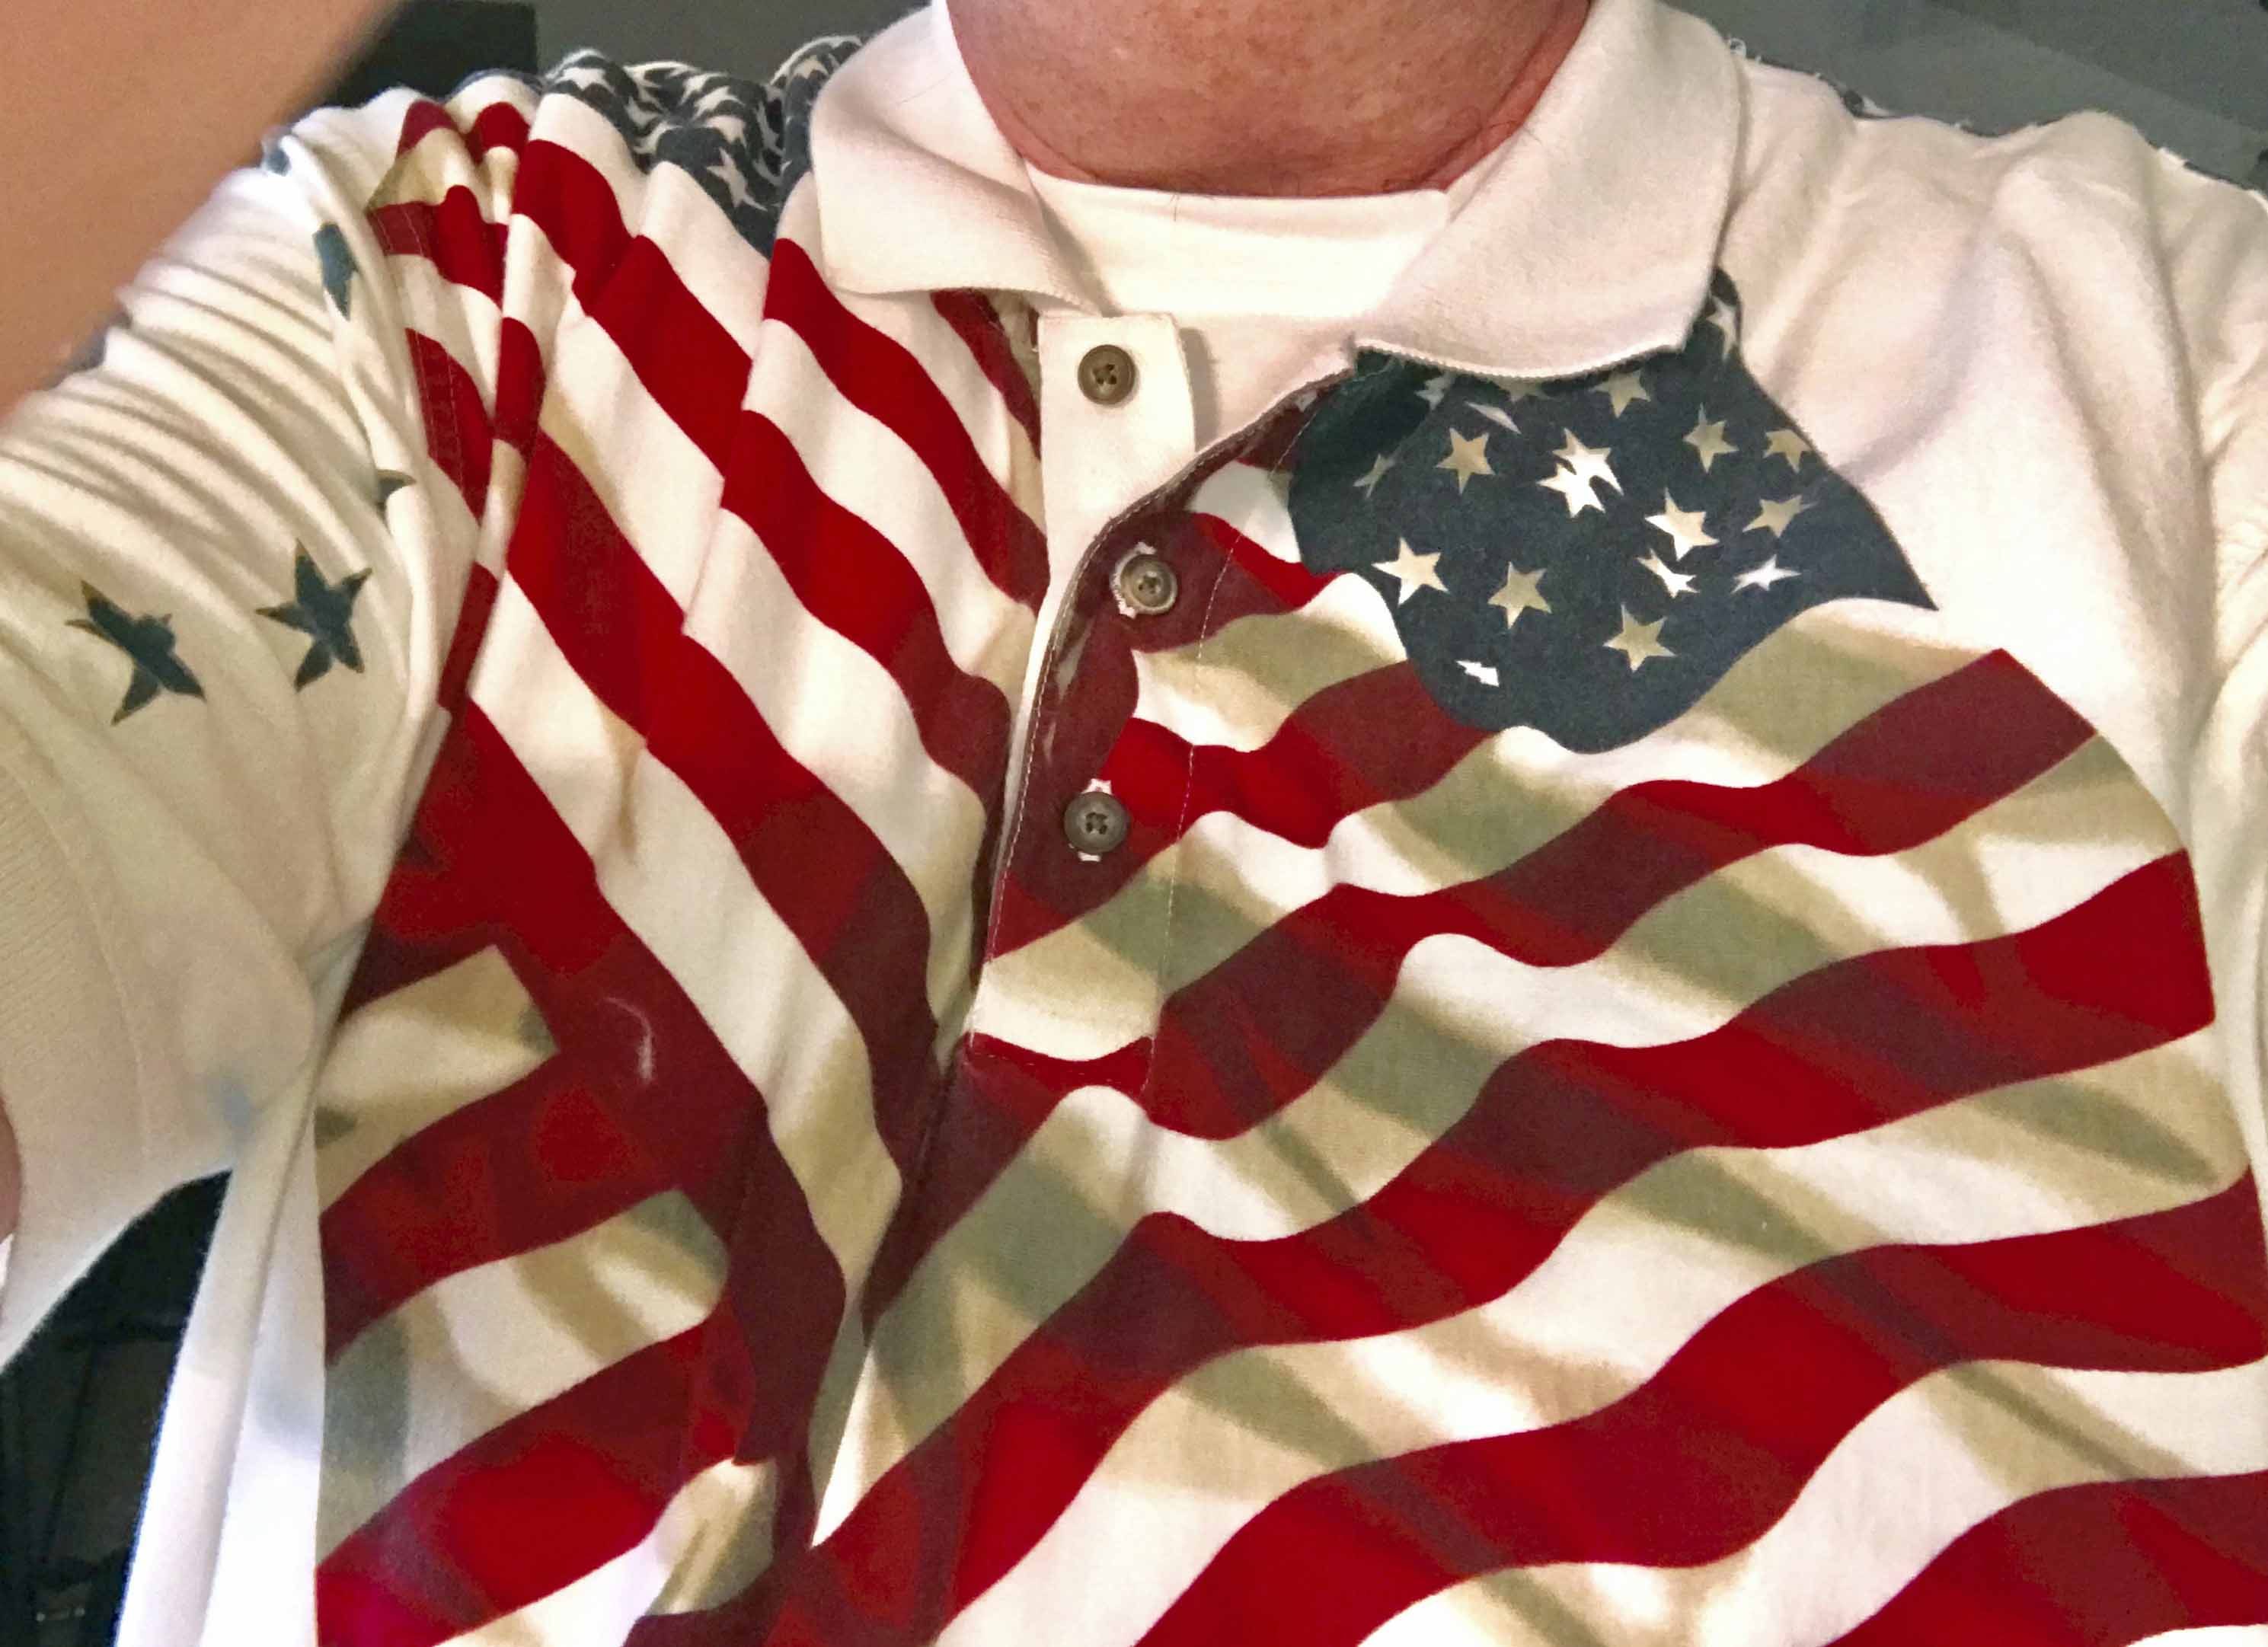 INdependence Day Polo shirt.jpg